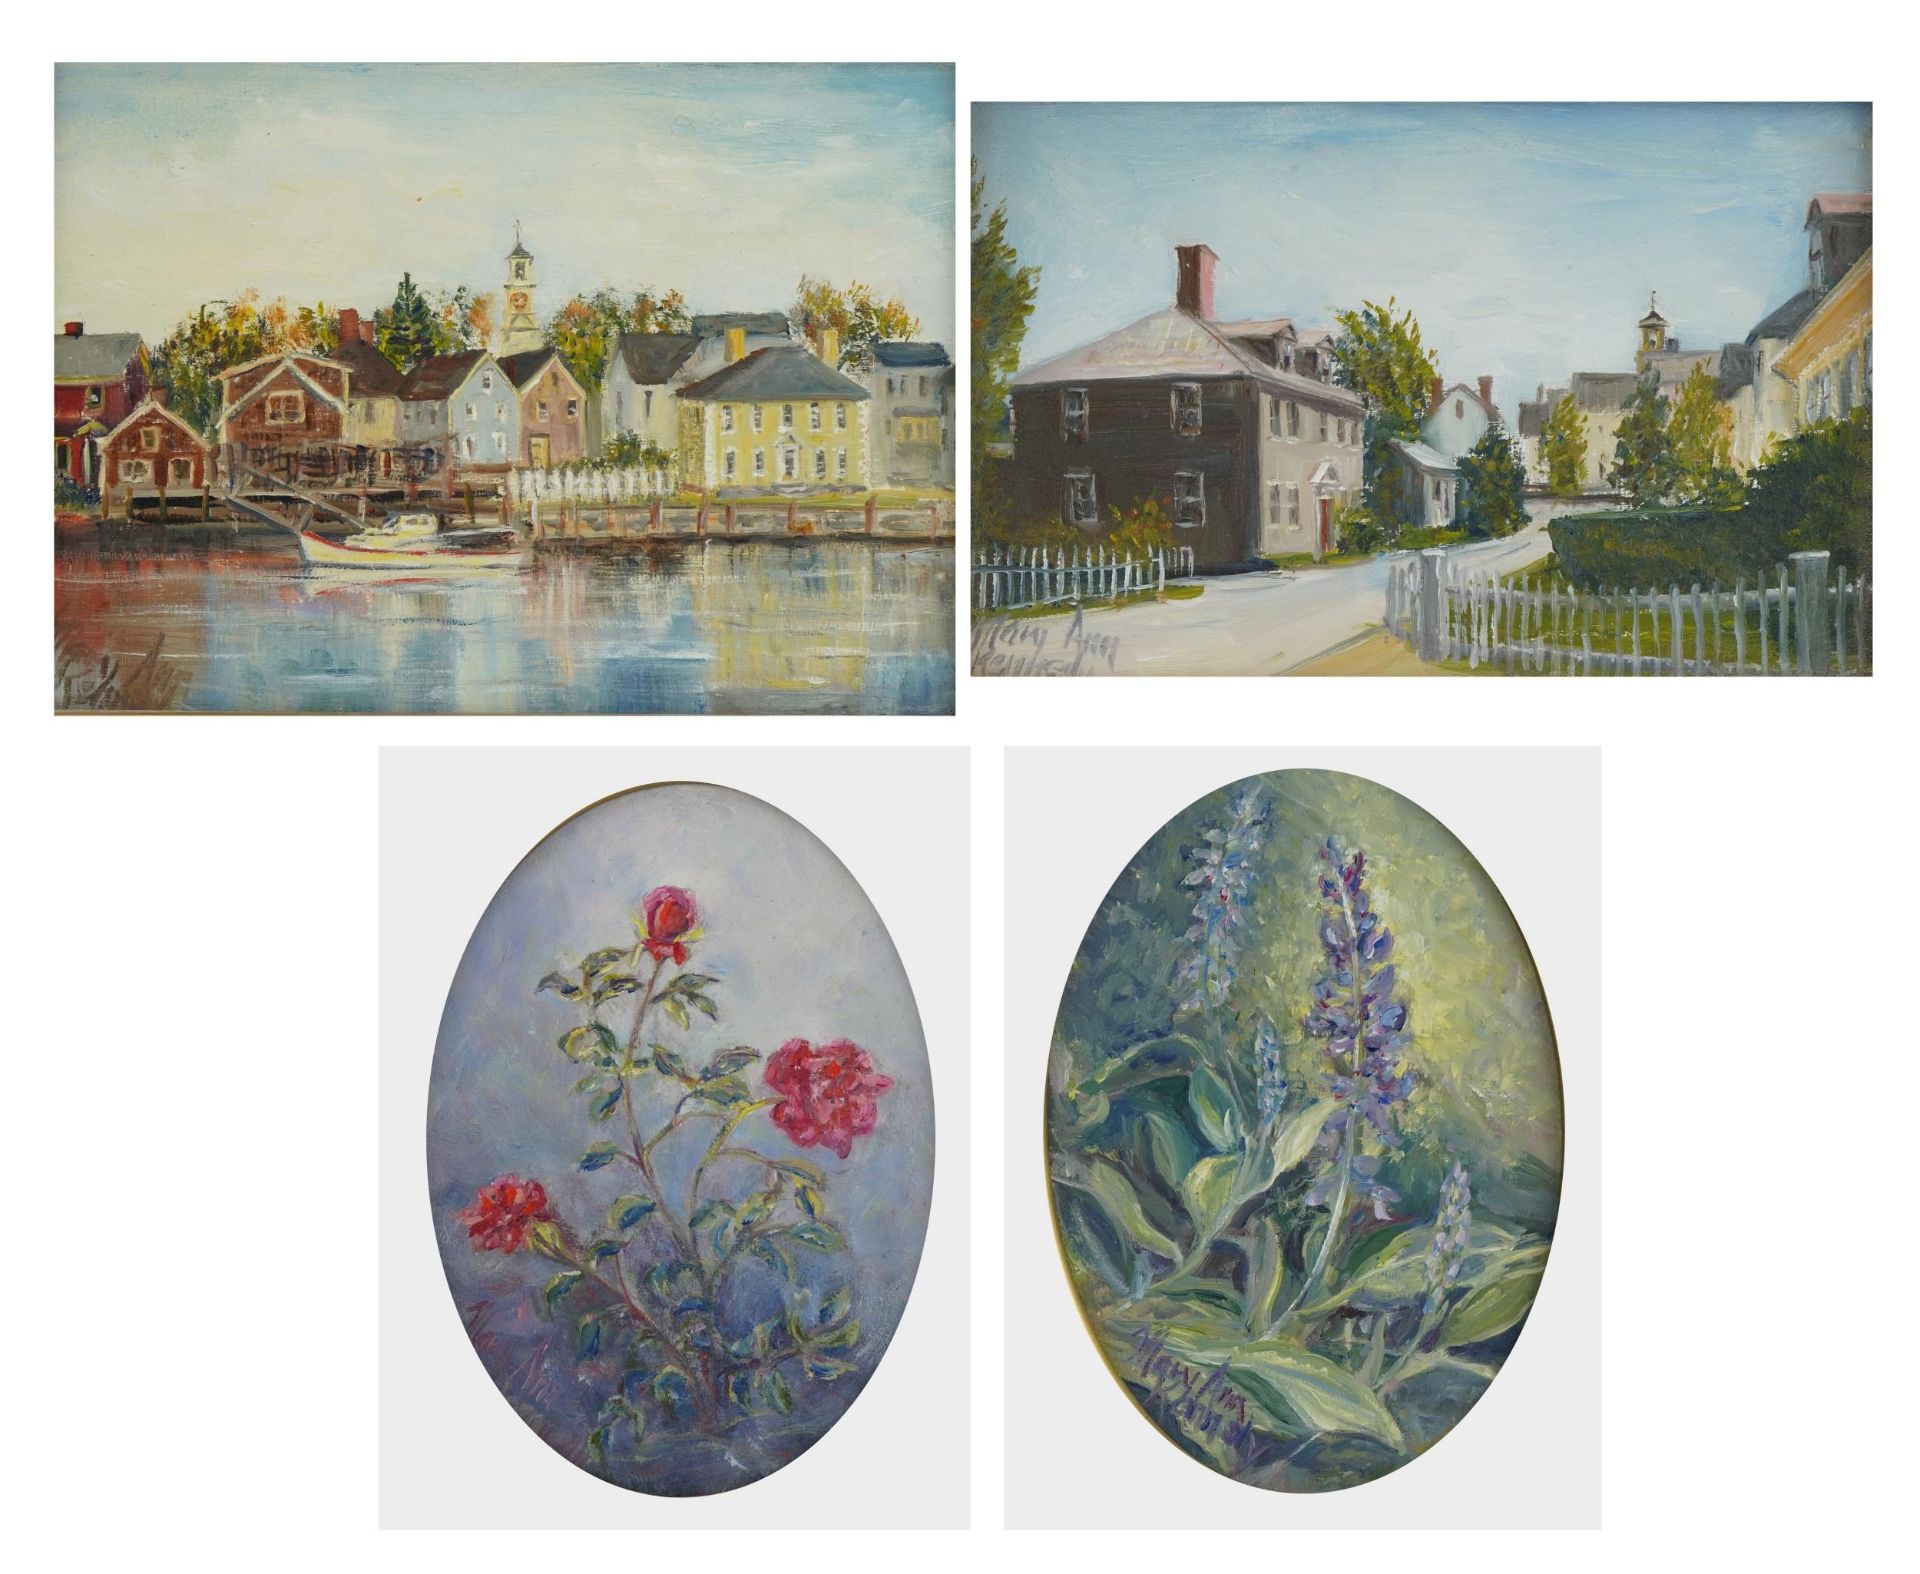 Mary Ann Kennedy - Still life flowers and village street scenes, four oil on boards, each with label